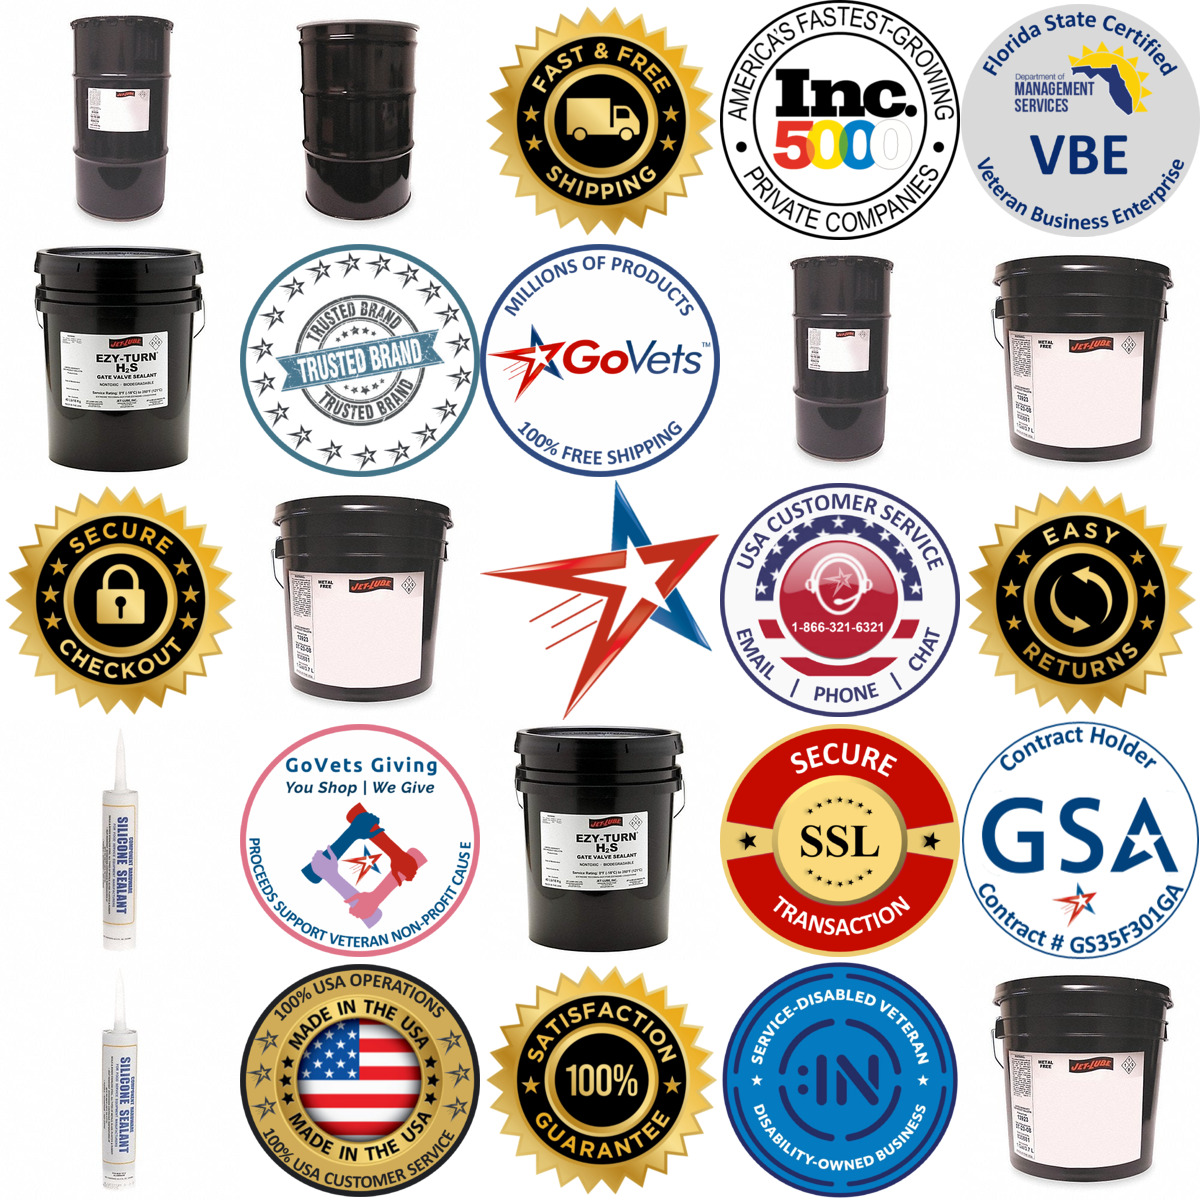 A selection of Valve Sealants products on GoVets